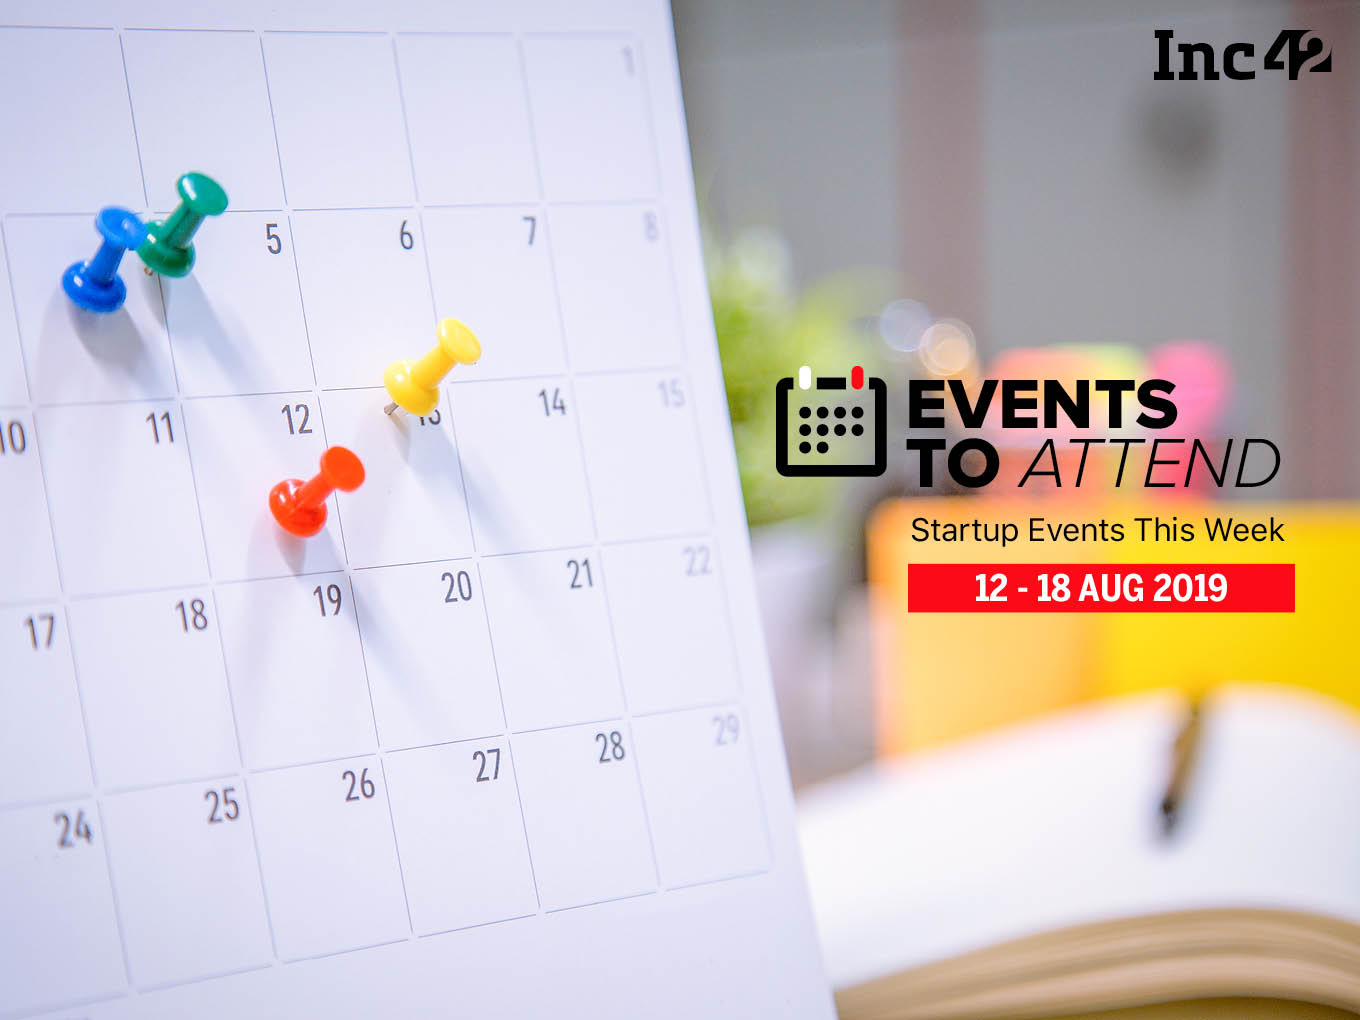 Startup Events This Week: Inc42 BIGShift Kochi, Morning Pitch, And More